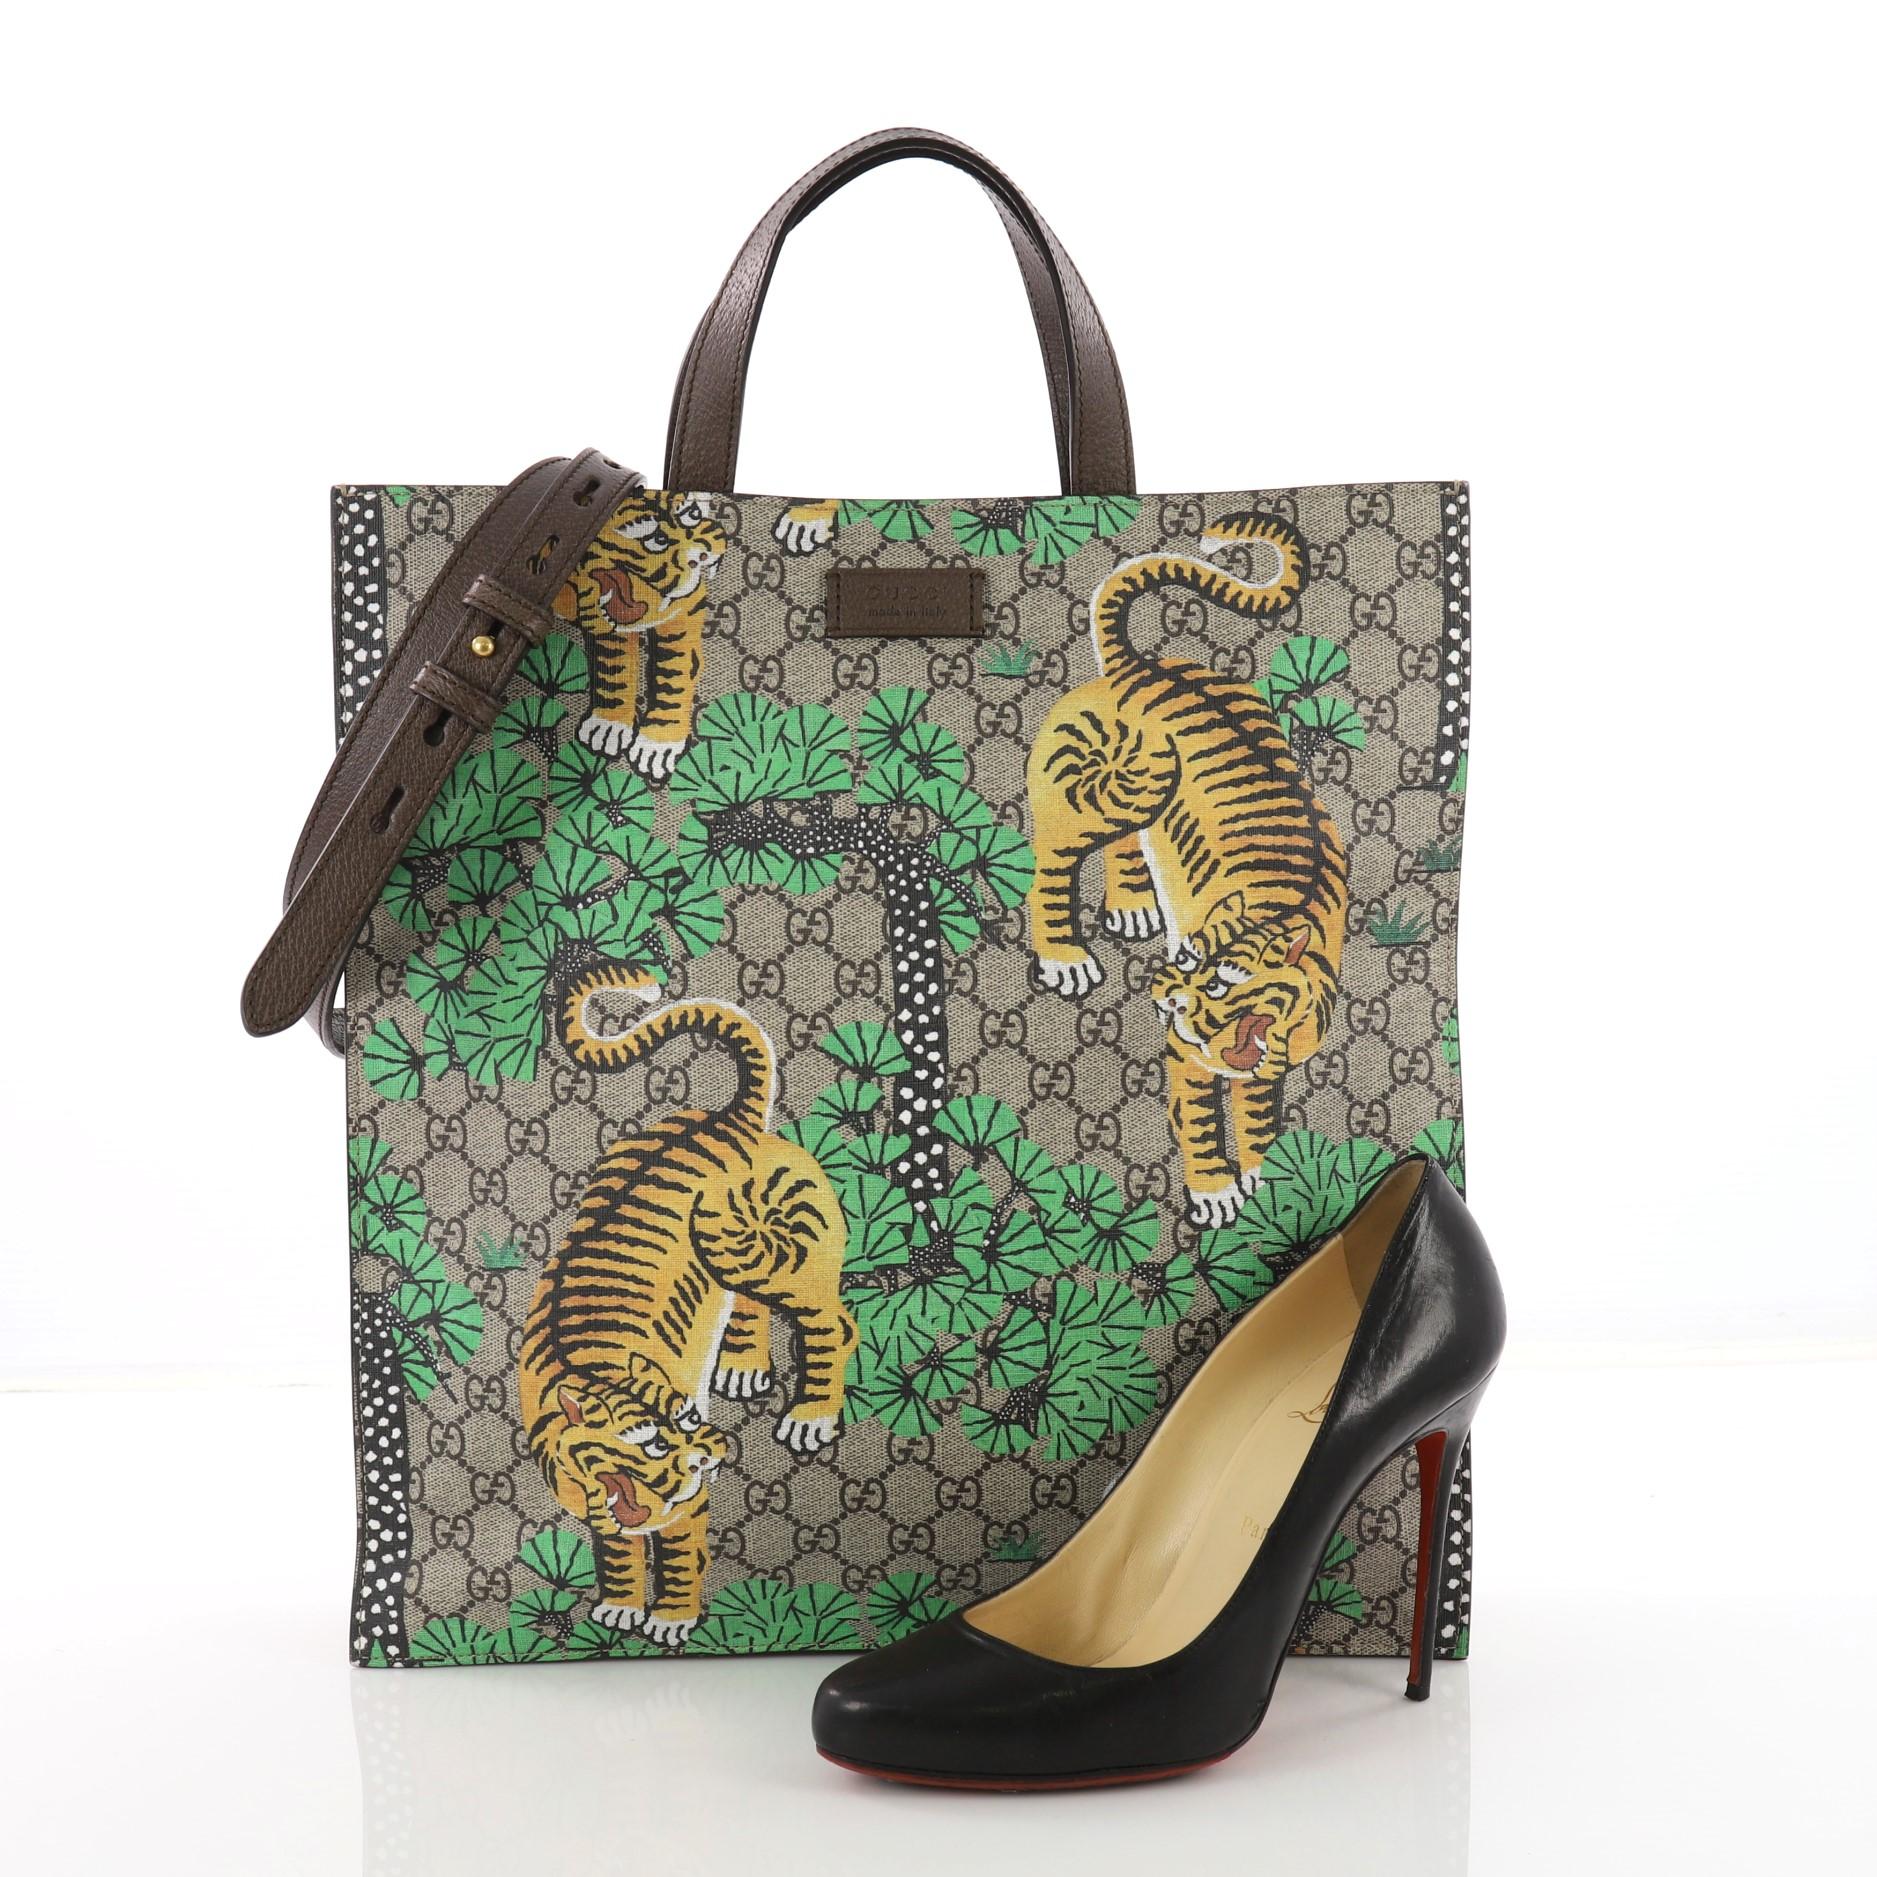 This Gucci Convertible Soft Open Tote Bengal Print GG Coated Canvas Tall, crafted in taupe Bengal printed GG coated canvas, features dual flat handles, adjustable shoulder strap, and aged bronze-tone hardware accents. Its magnetic closure opens to a